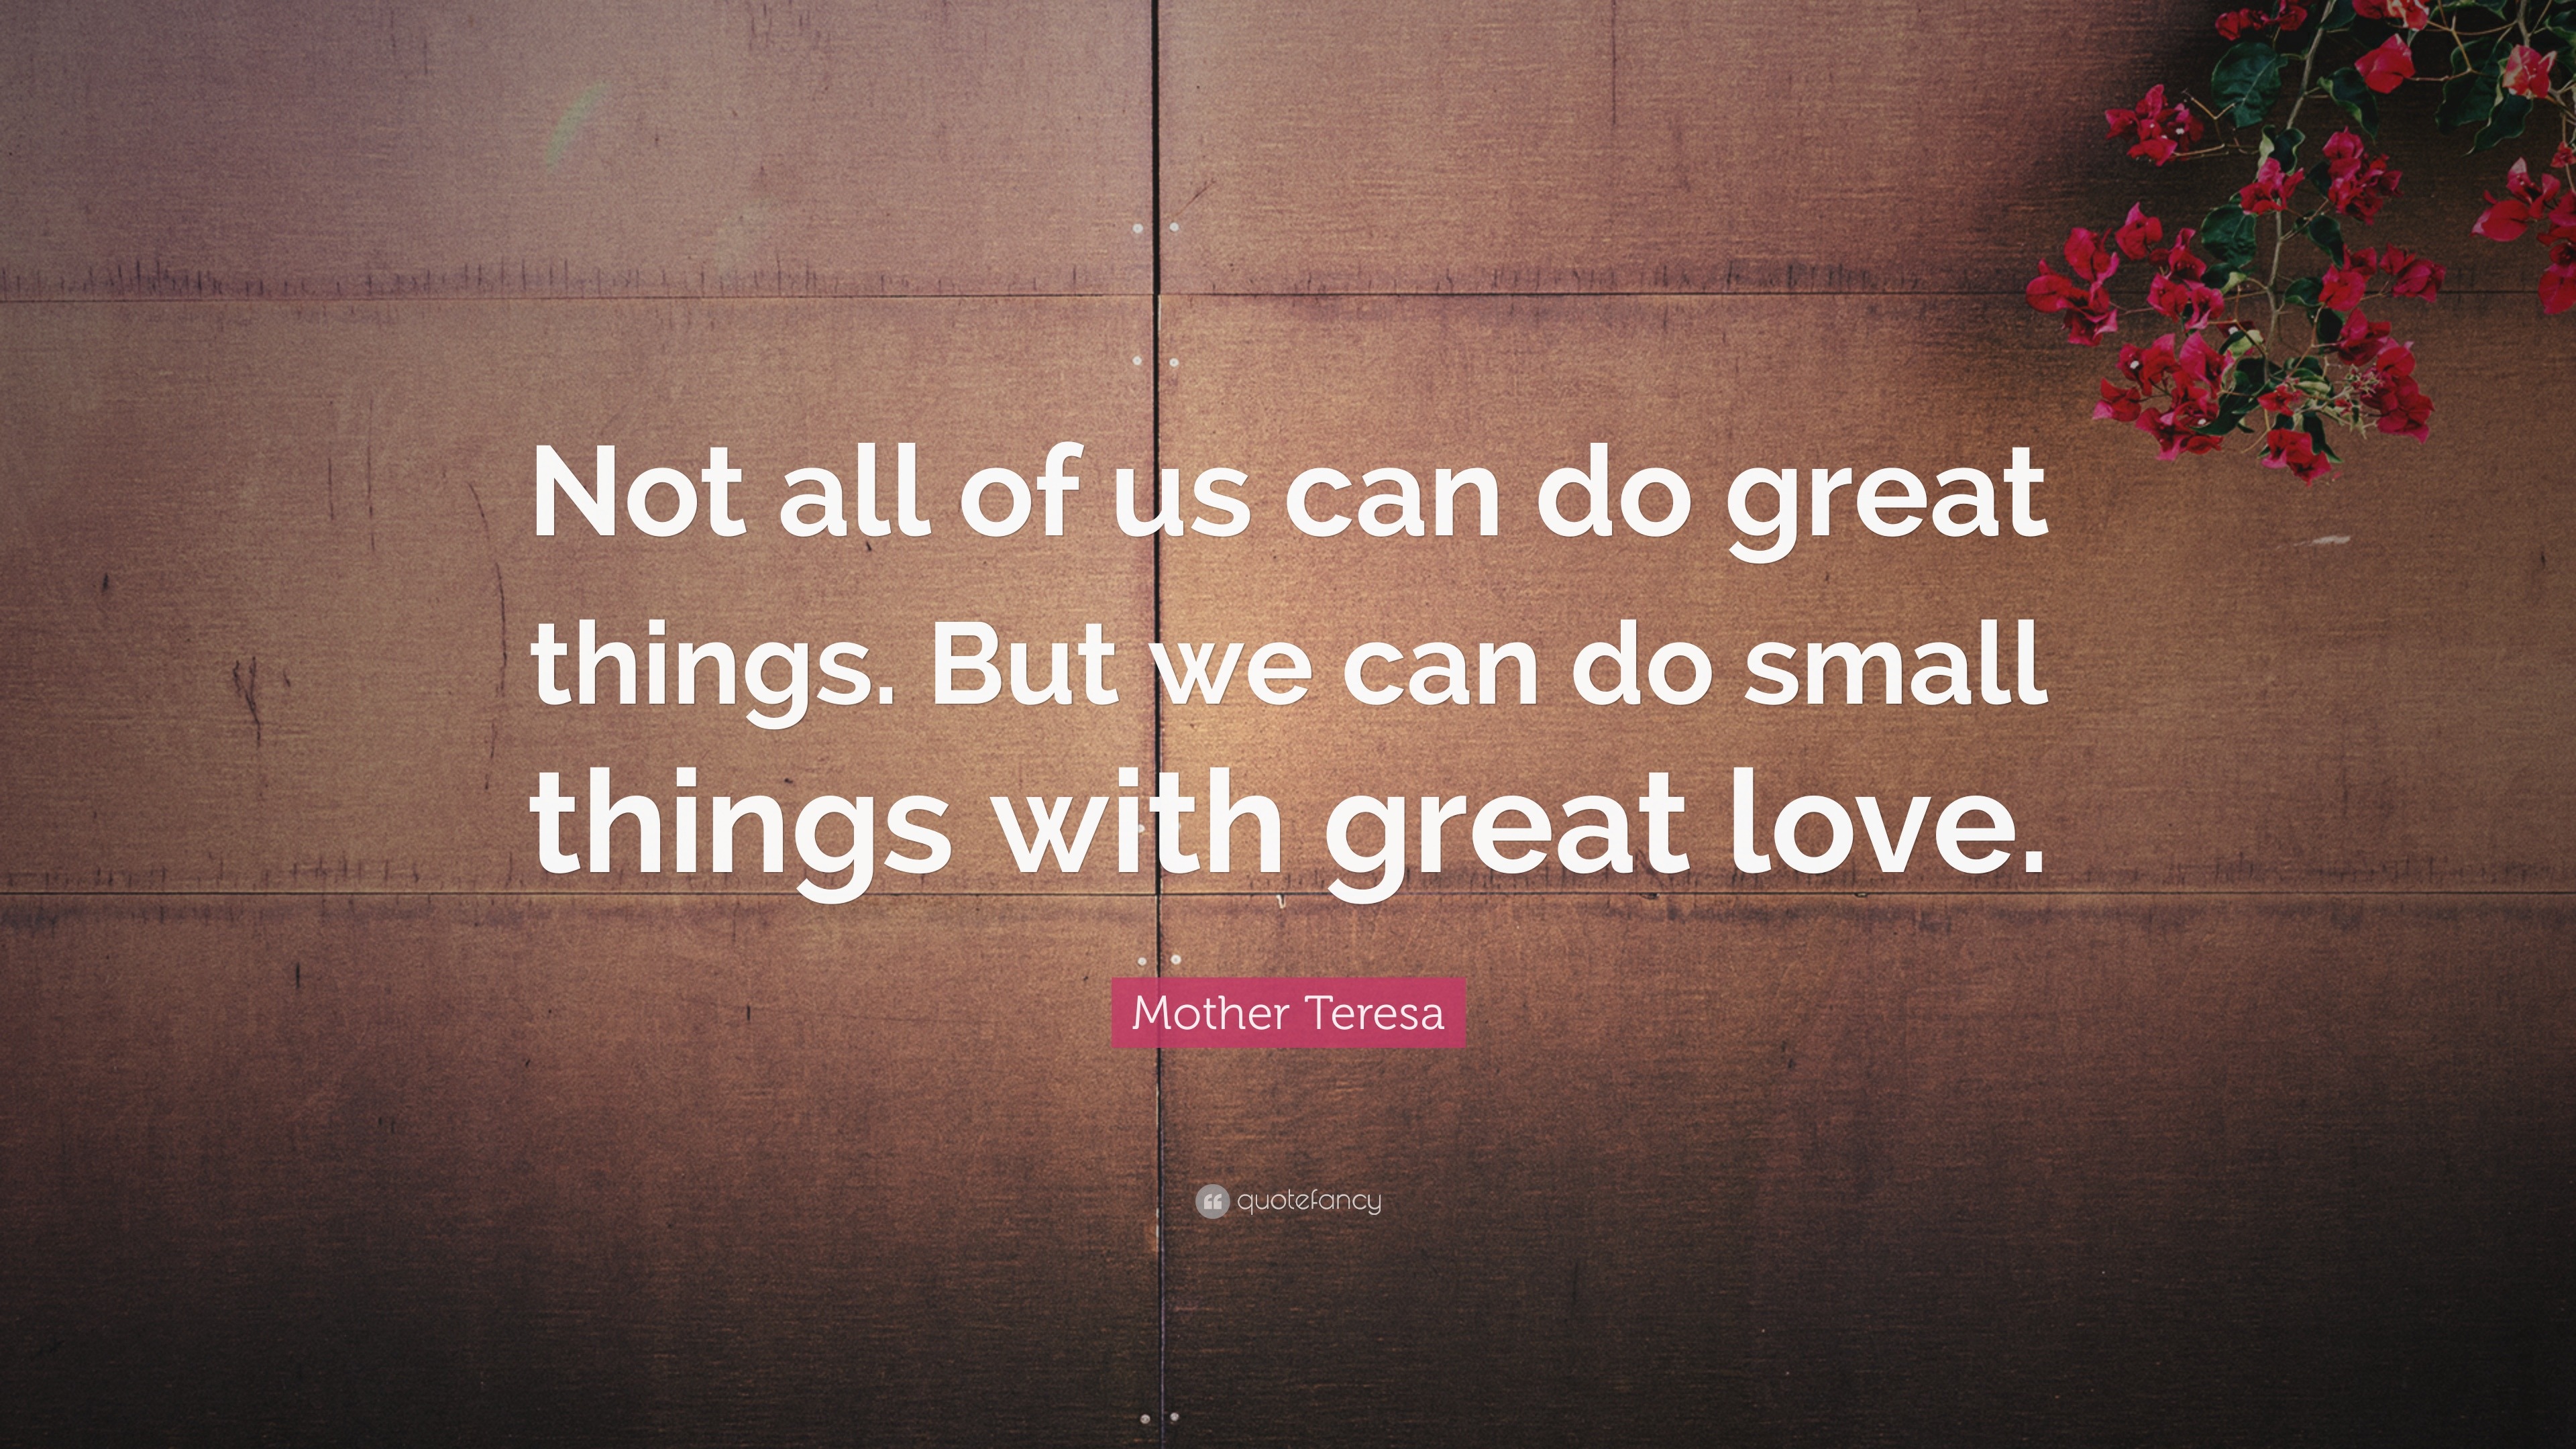 Mother Teresa Quote “Not all of us can do great things But we